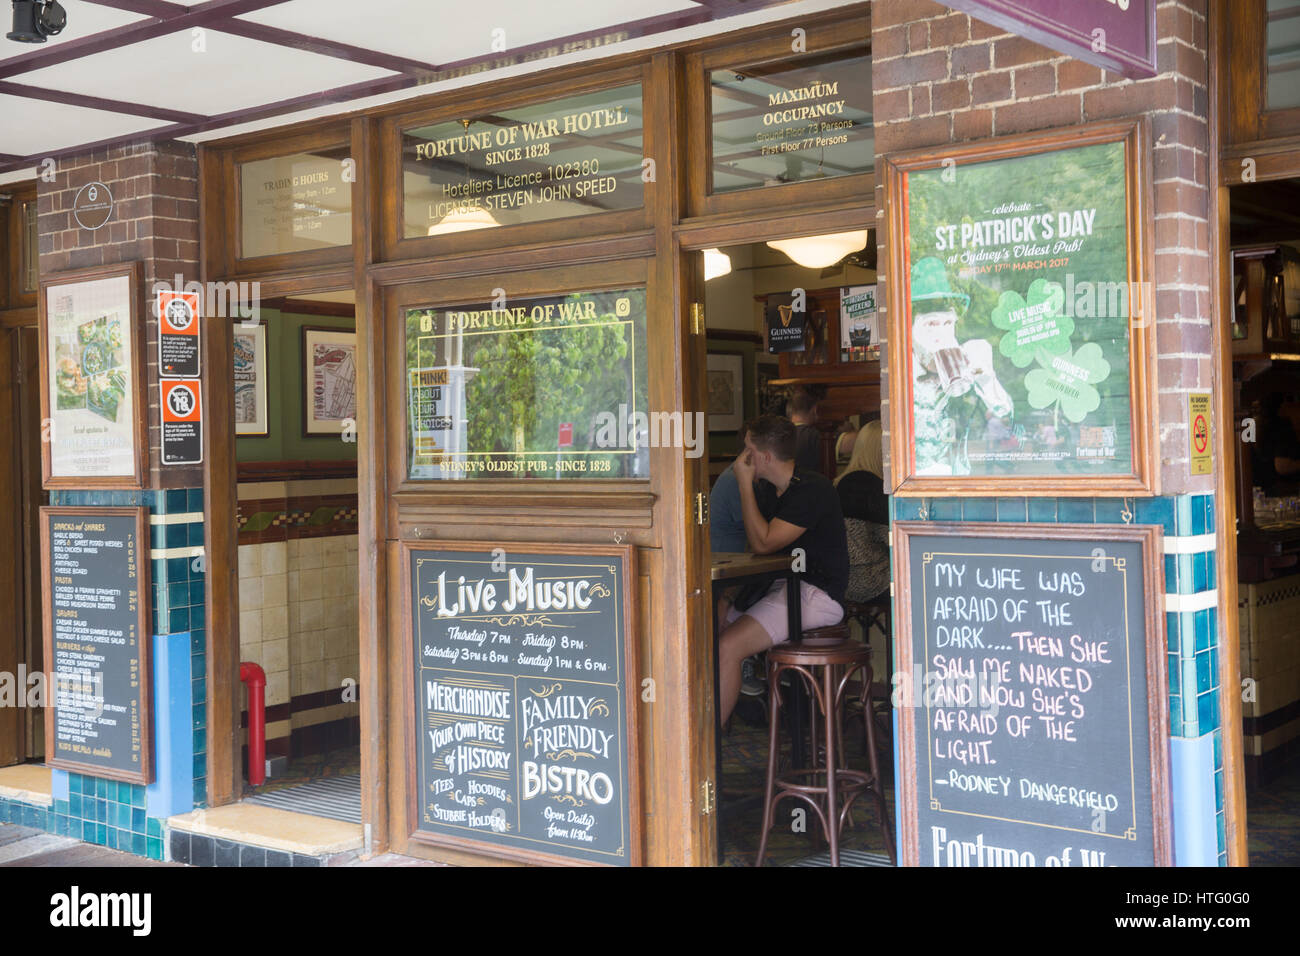 Fortune of War is the oldest Sydney pub  and is situated in the Rocks area ,New south wales,Australia Stock Photo